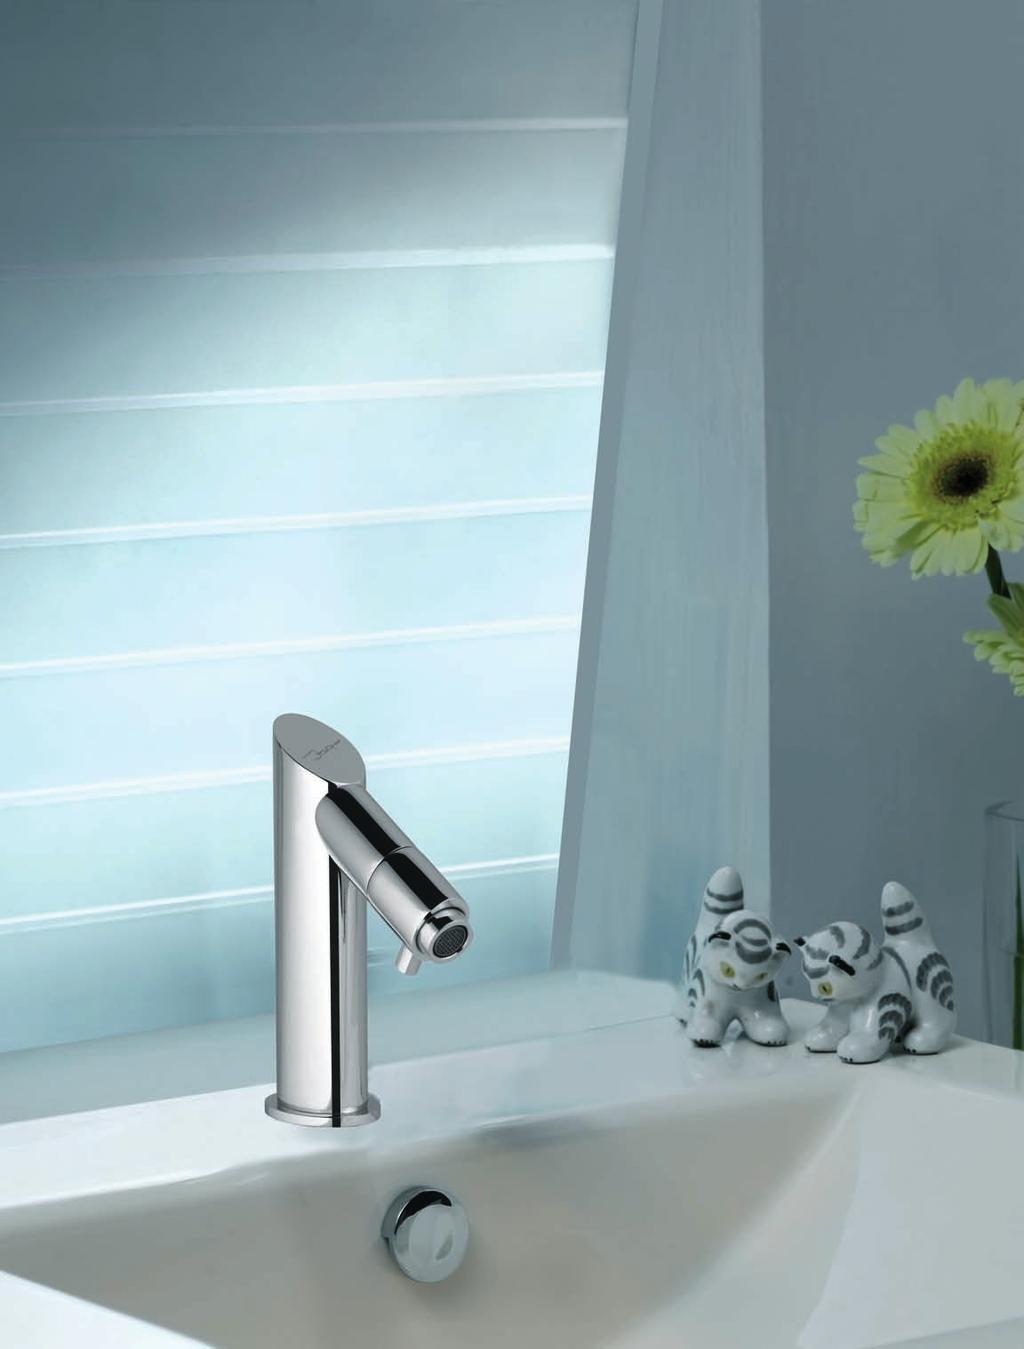 MOUTH OPERATING FAUCETS Sleek, minimalist looks dominate the design principal of these taps.